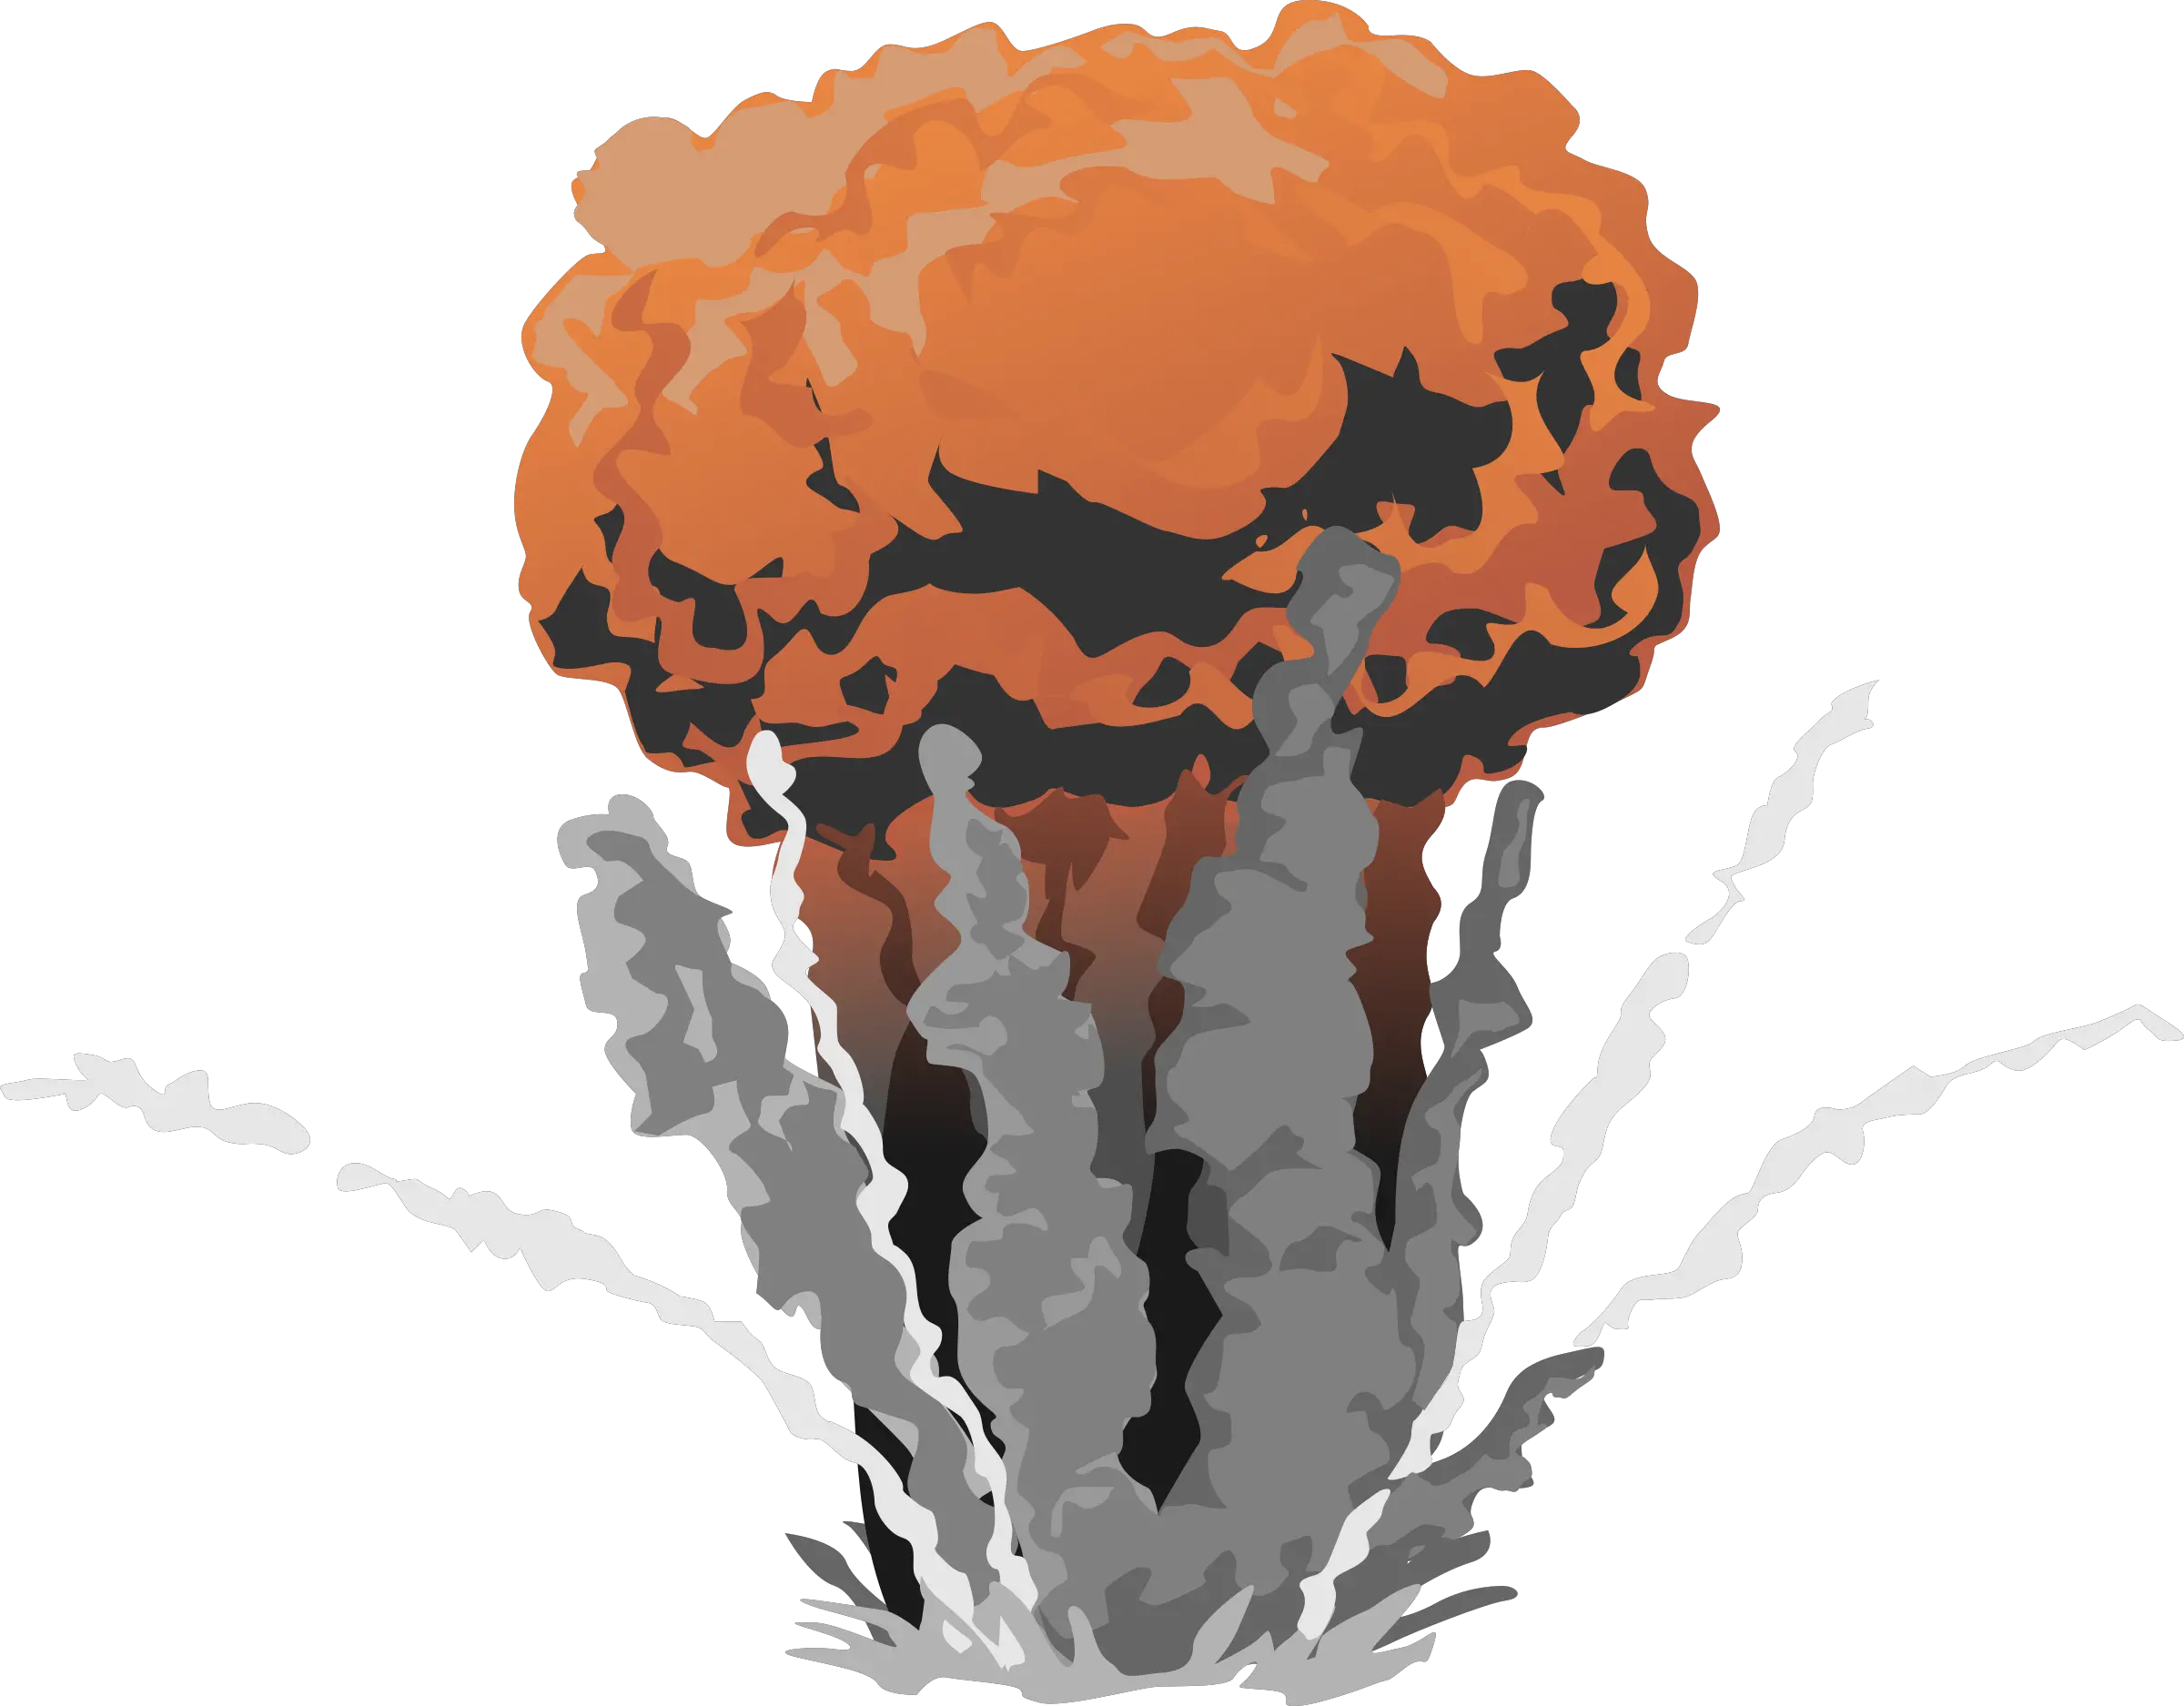 Fire Explosion With Smoke Png Image Purepng Free Atomic Bomb Gif Png Smoke Clipart Transparent